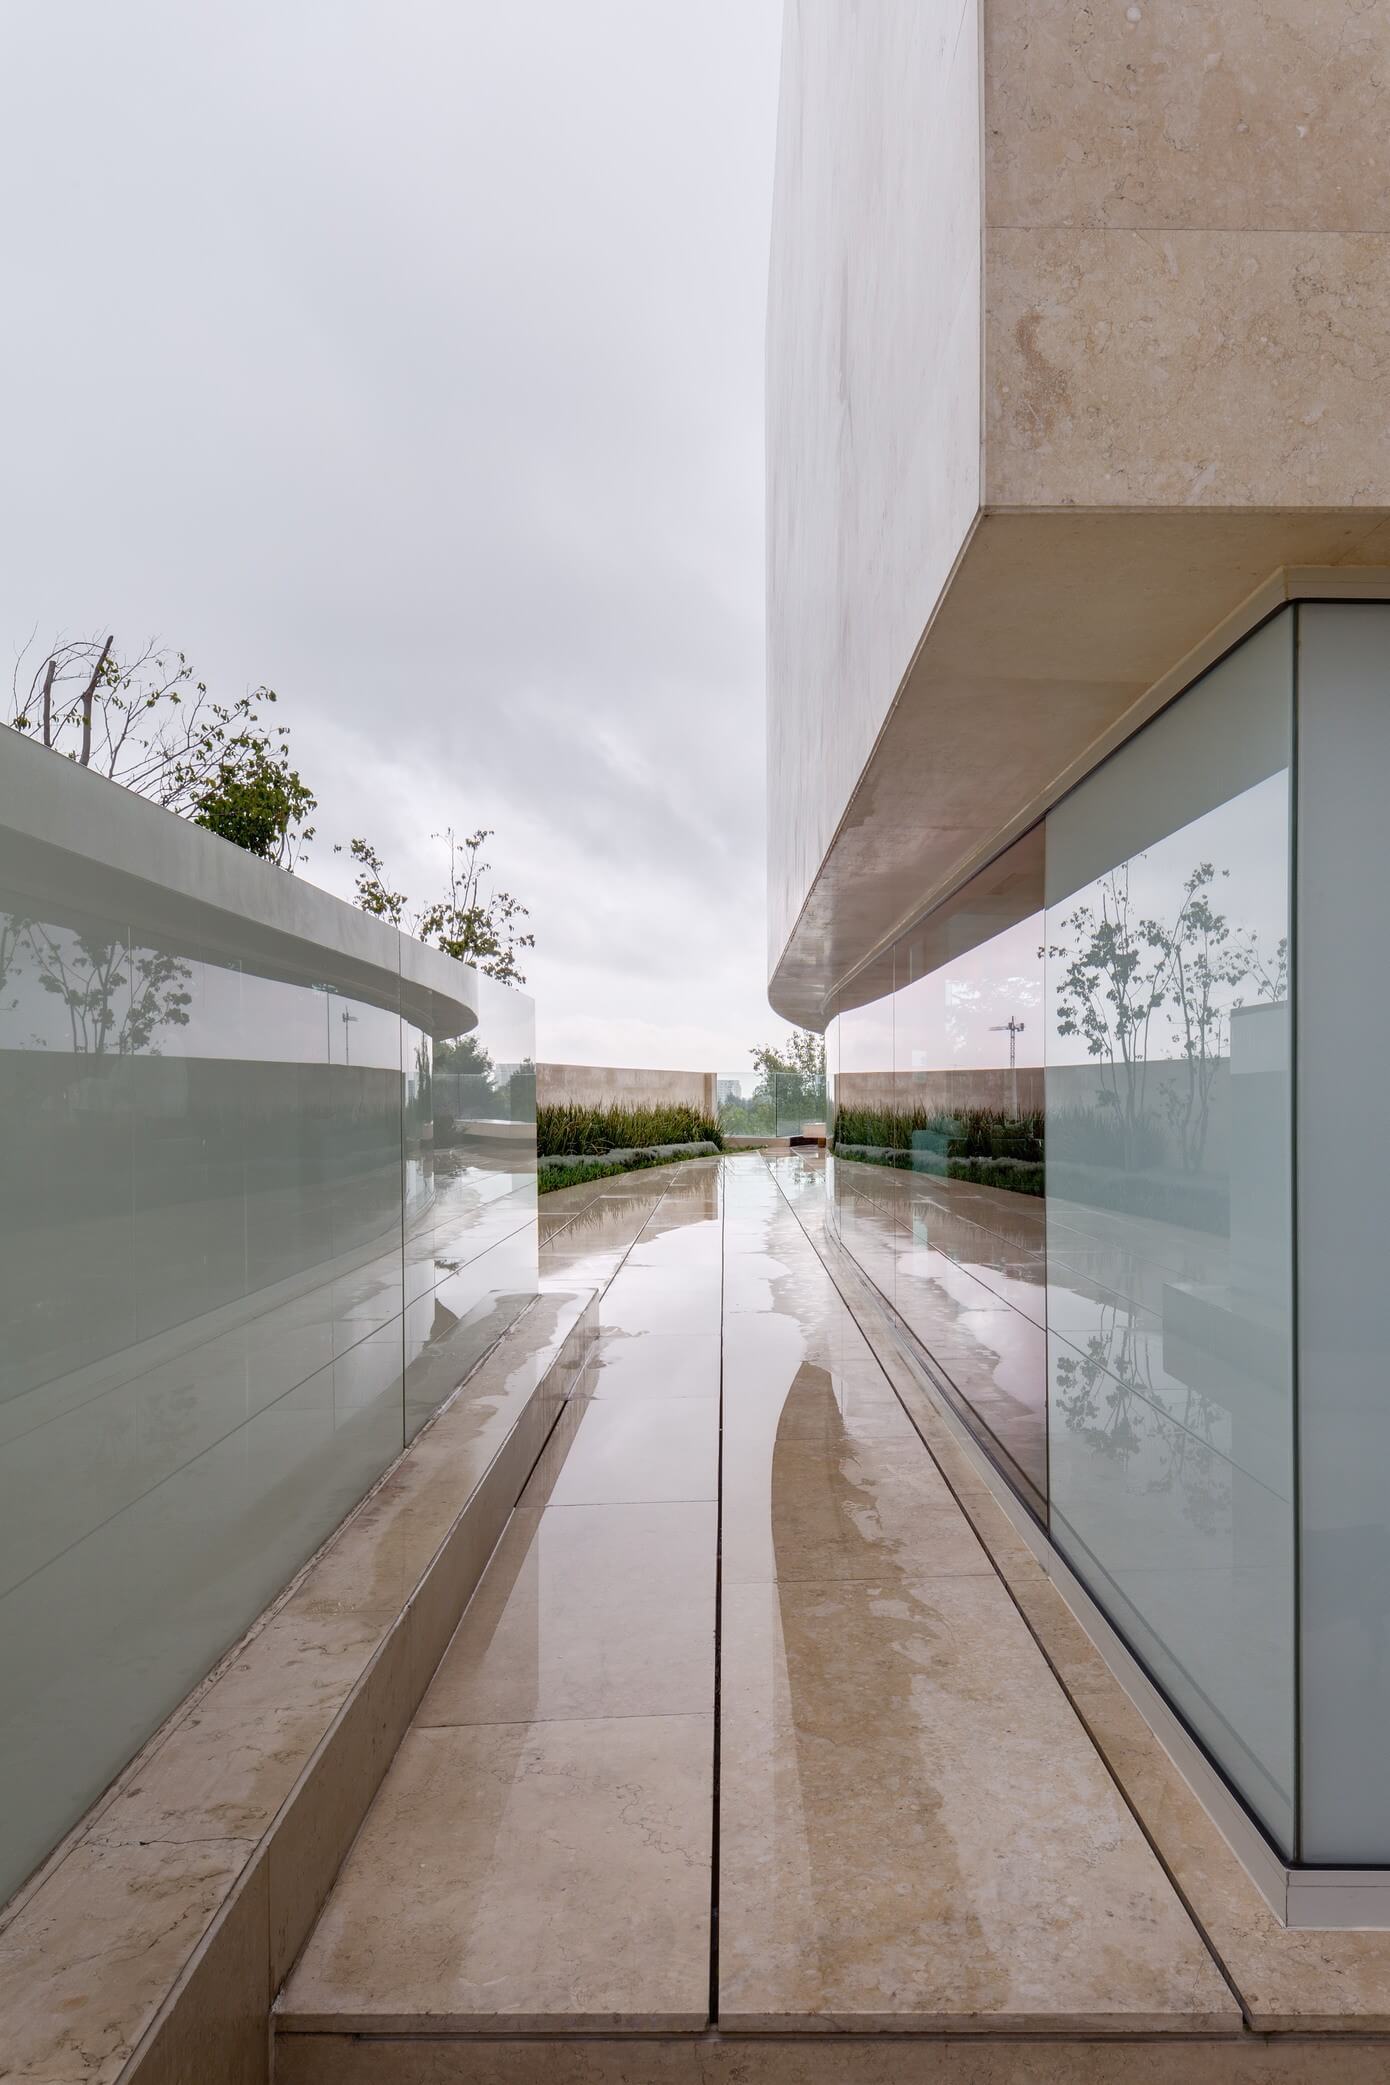 Country Club Residence by Migdal Arquitectos